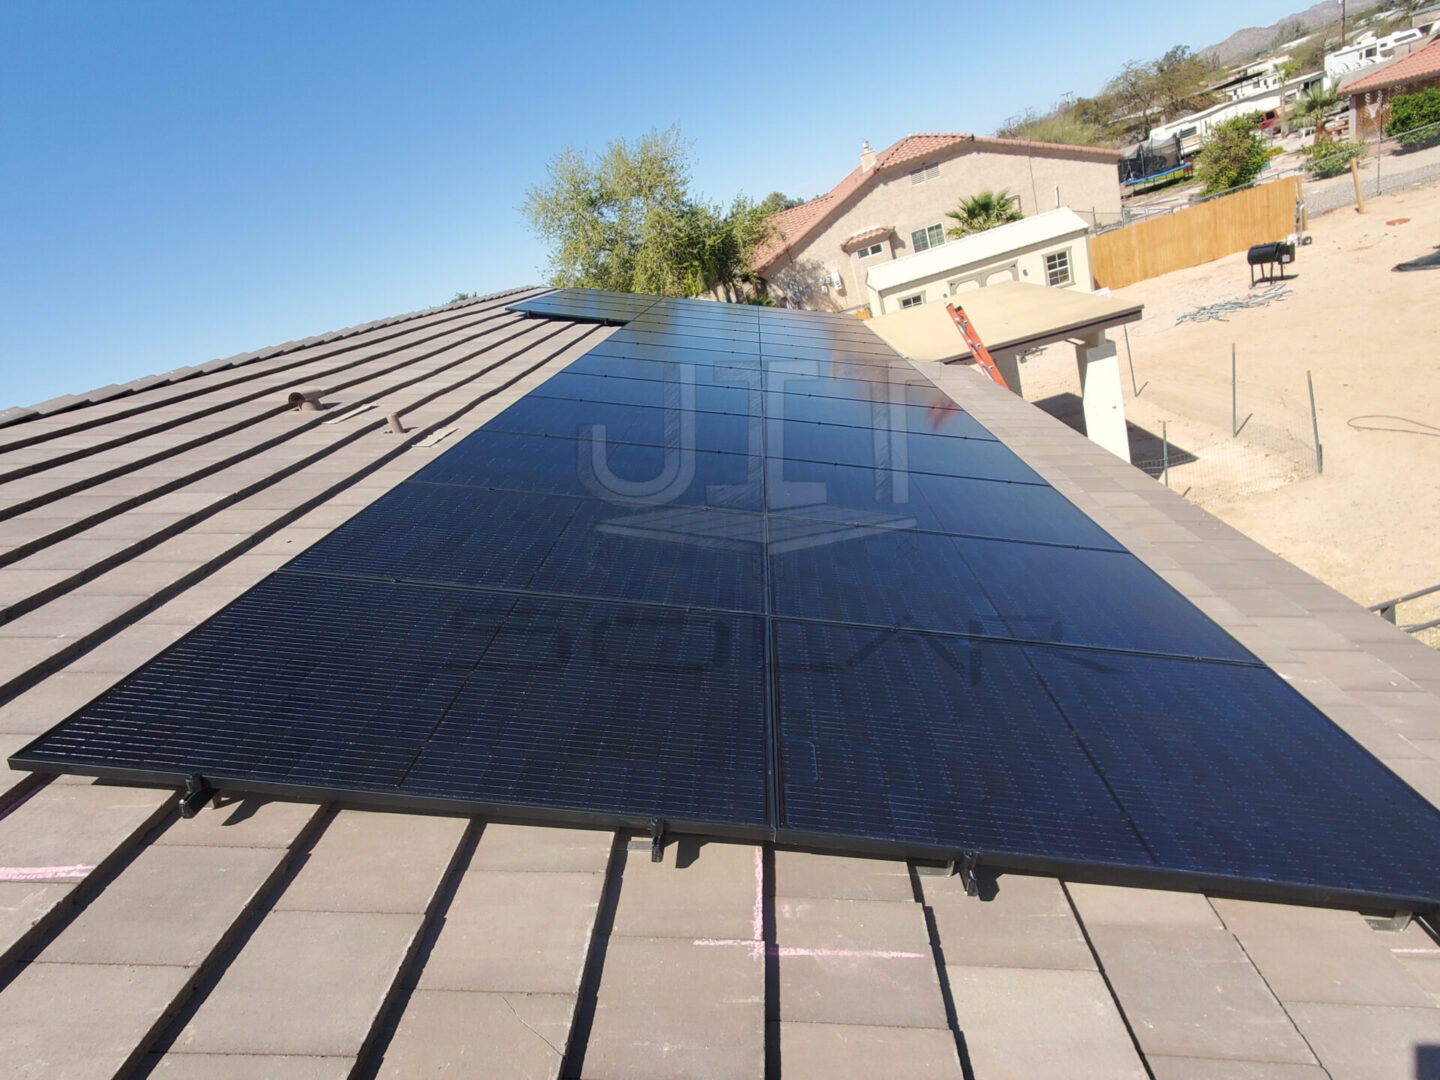 Photograph of solar panels installed on the roof